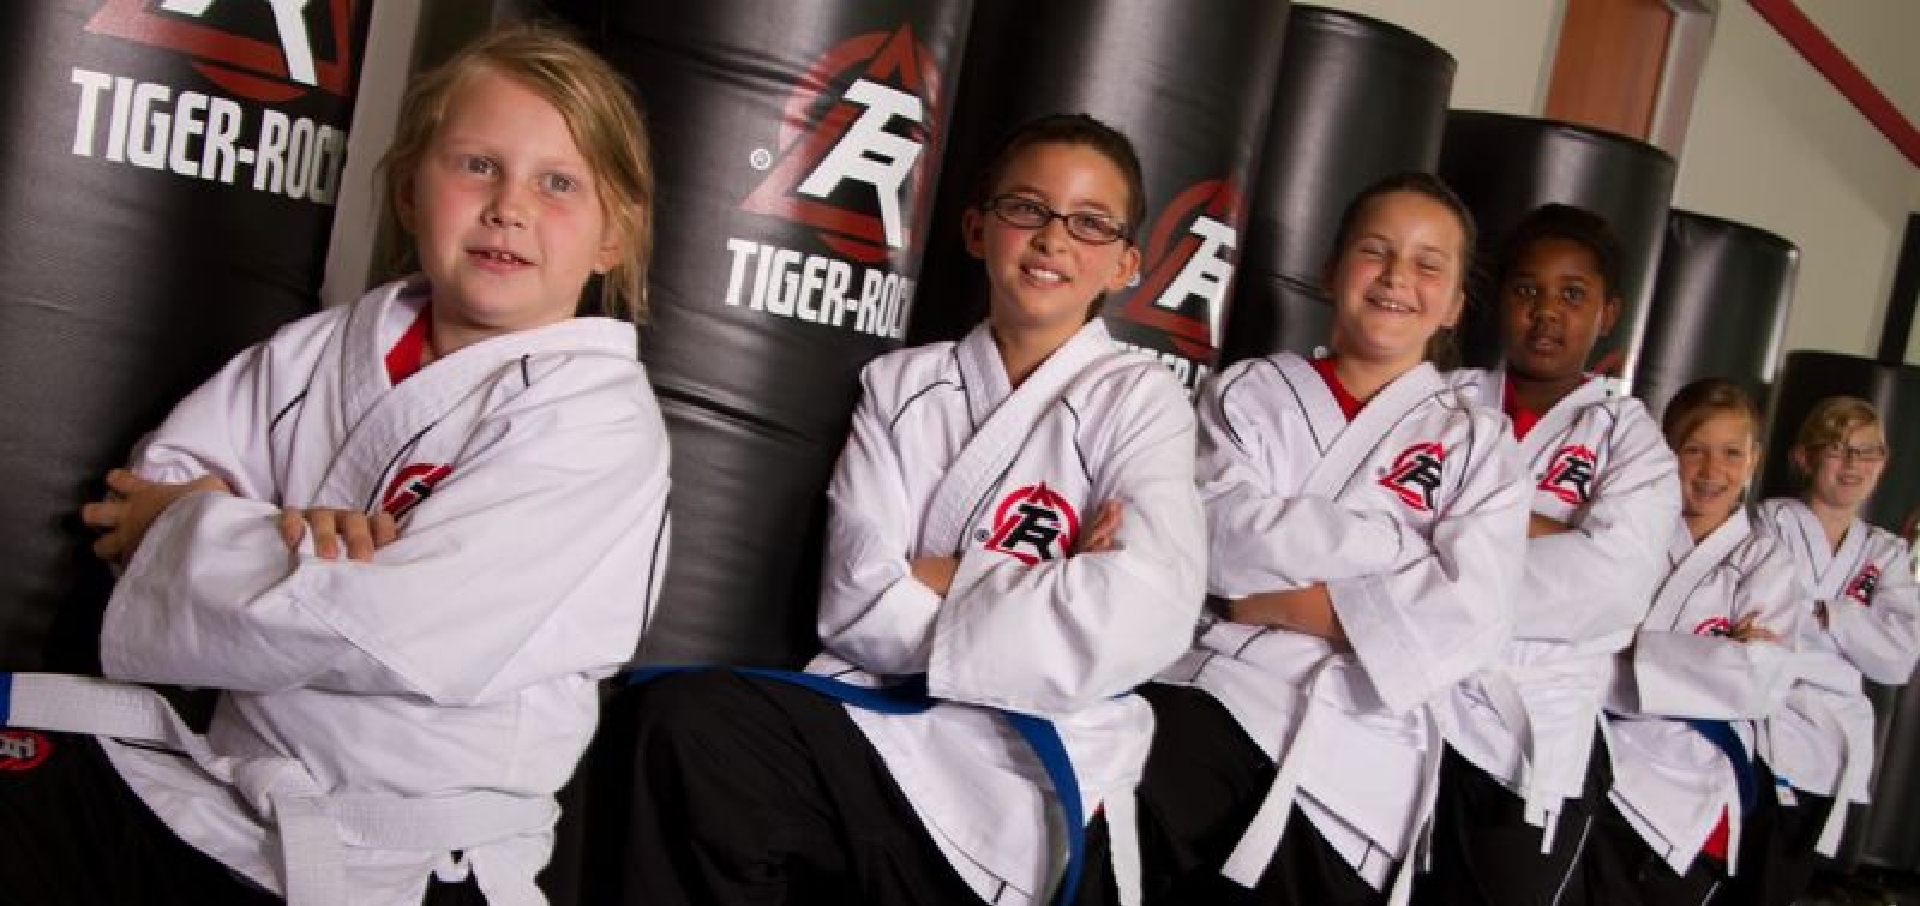 Tiger-Rock Martial Arts of Metairie